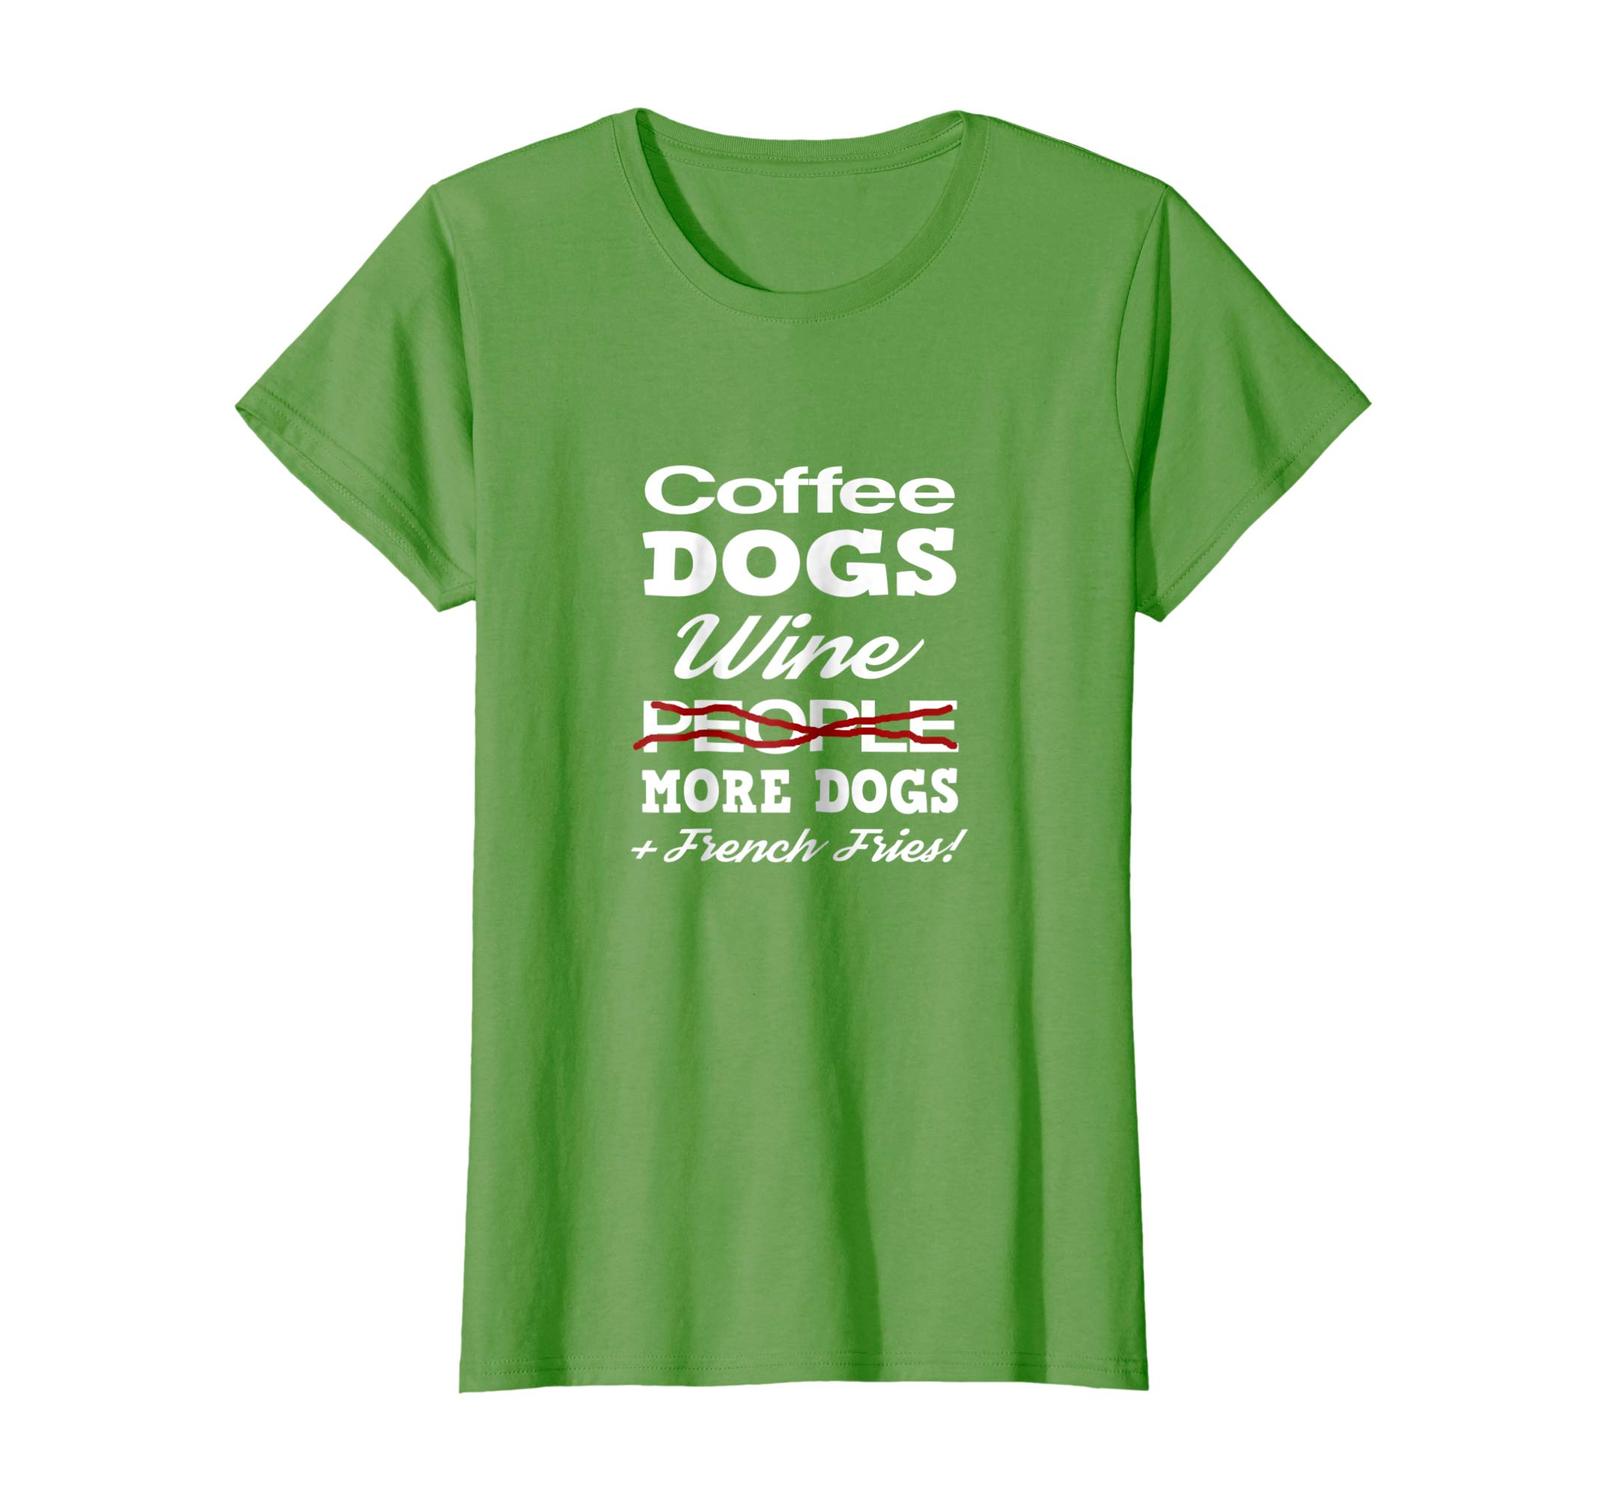 Dog Fashion - Coffee Dogs Wine More Dogs and French Fries Funny T-Shirt Wowen